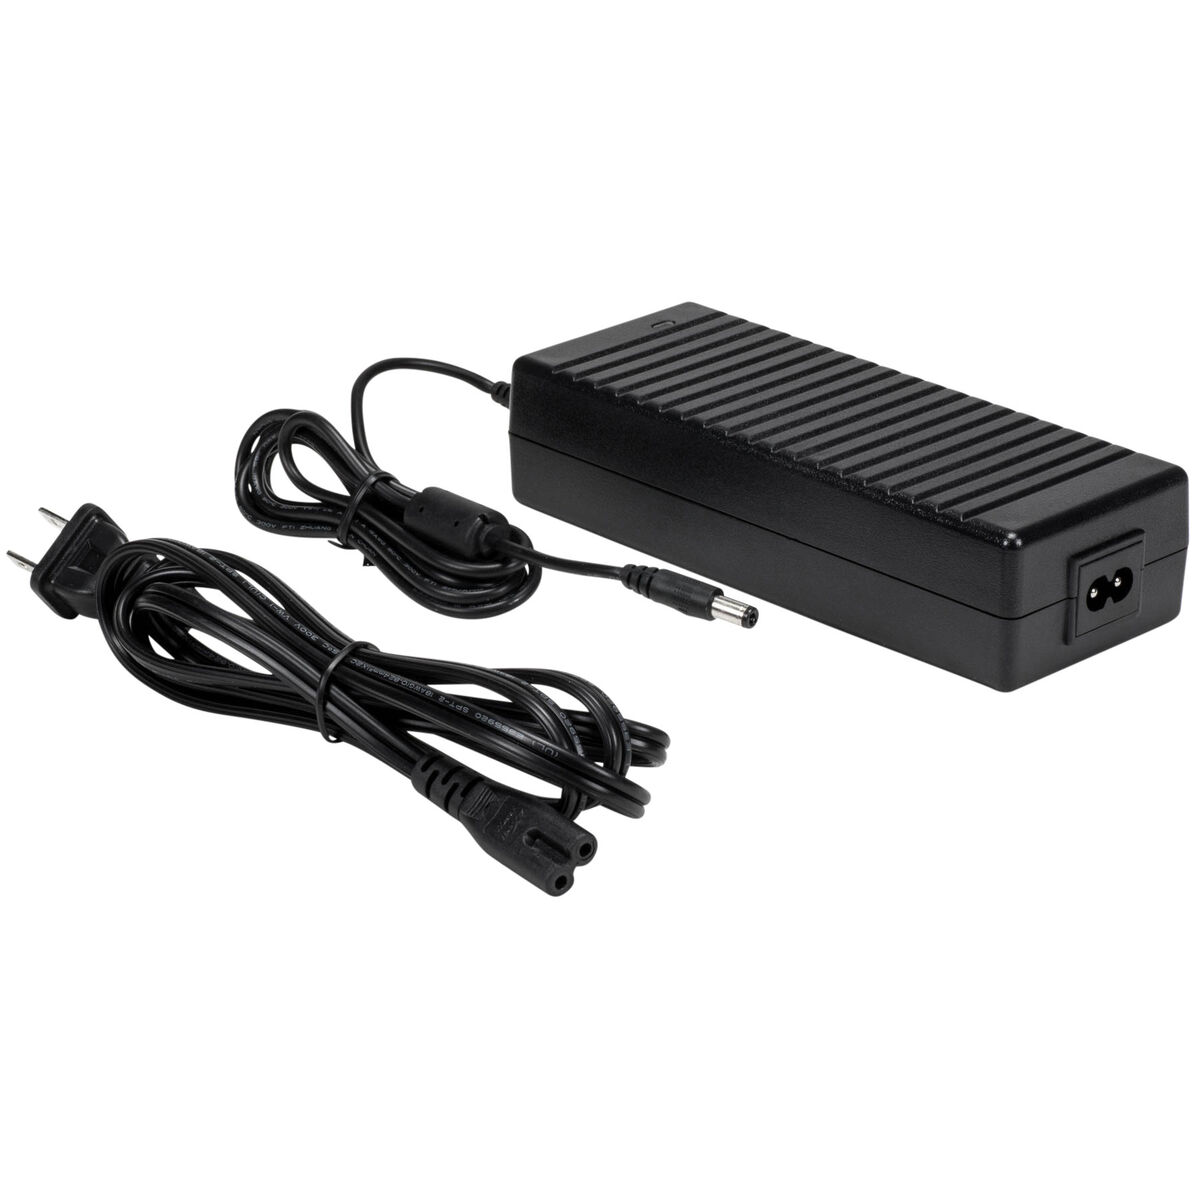 Details about   12-24V 5A Adjustable Power Supply Voltage Regulation Power Adapter With AC US 